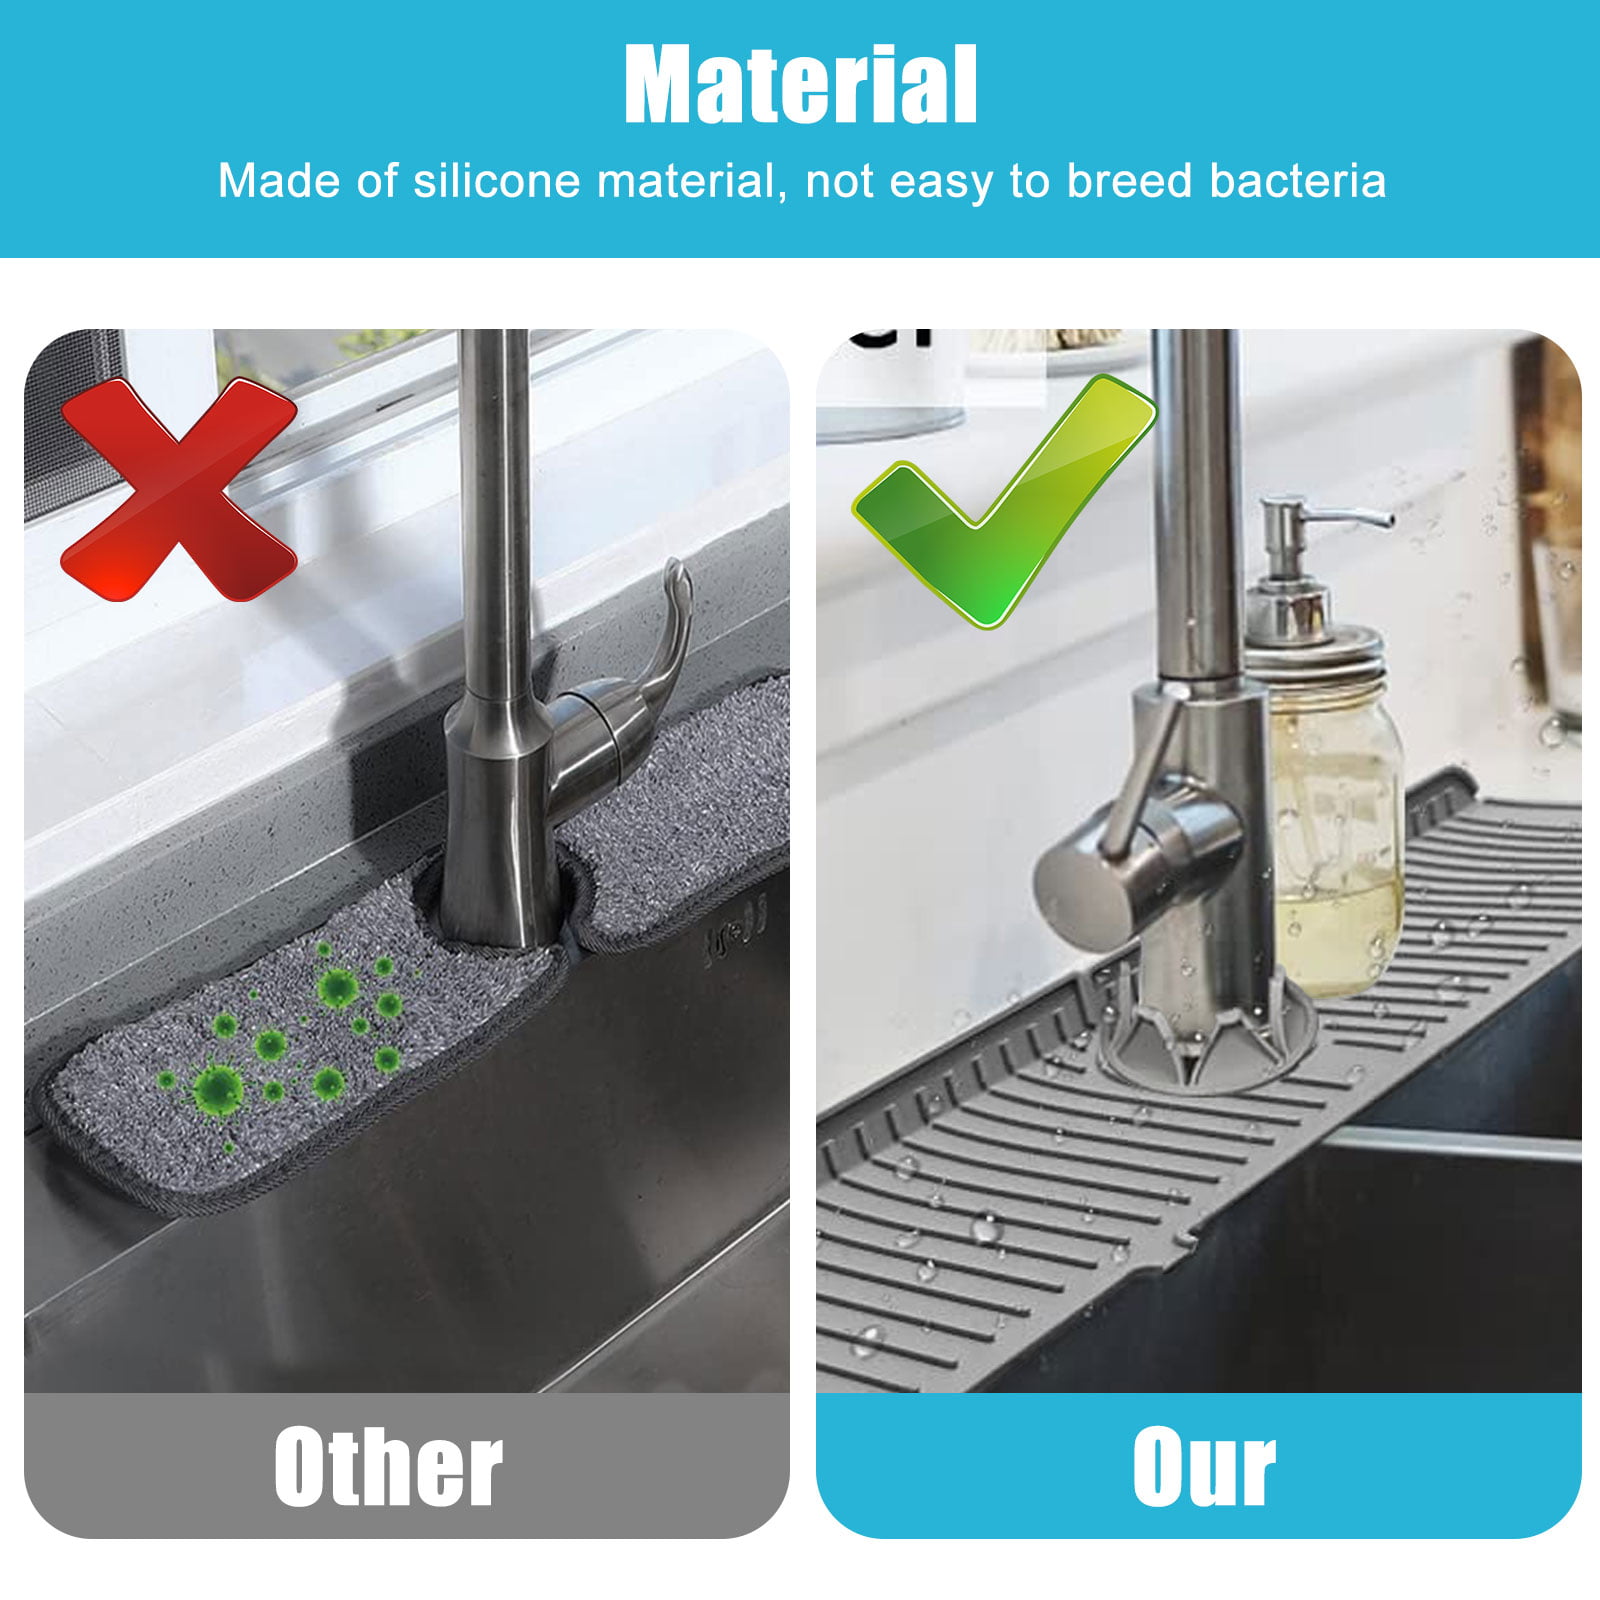 Fatpig Sink Faucet Mat with Slope for Self Draining Silicone Sink Splash Guard As Soap Dish & Sponge Holder Faucet Handle Drip Catcher Tray for Kitchen